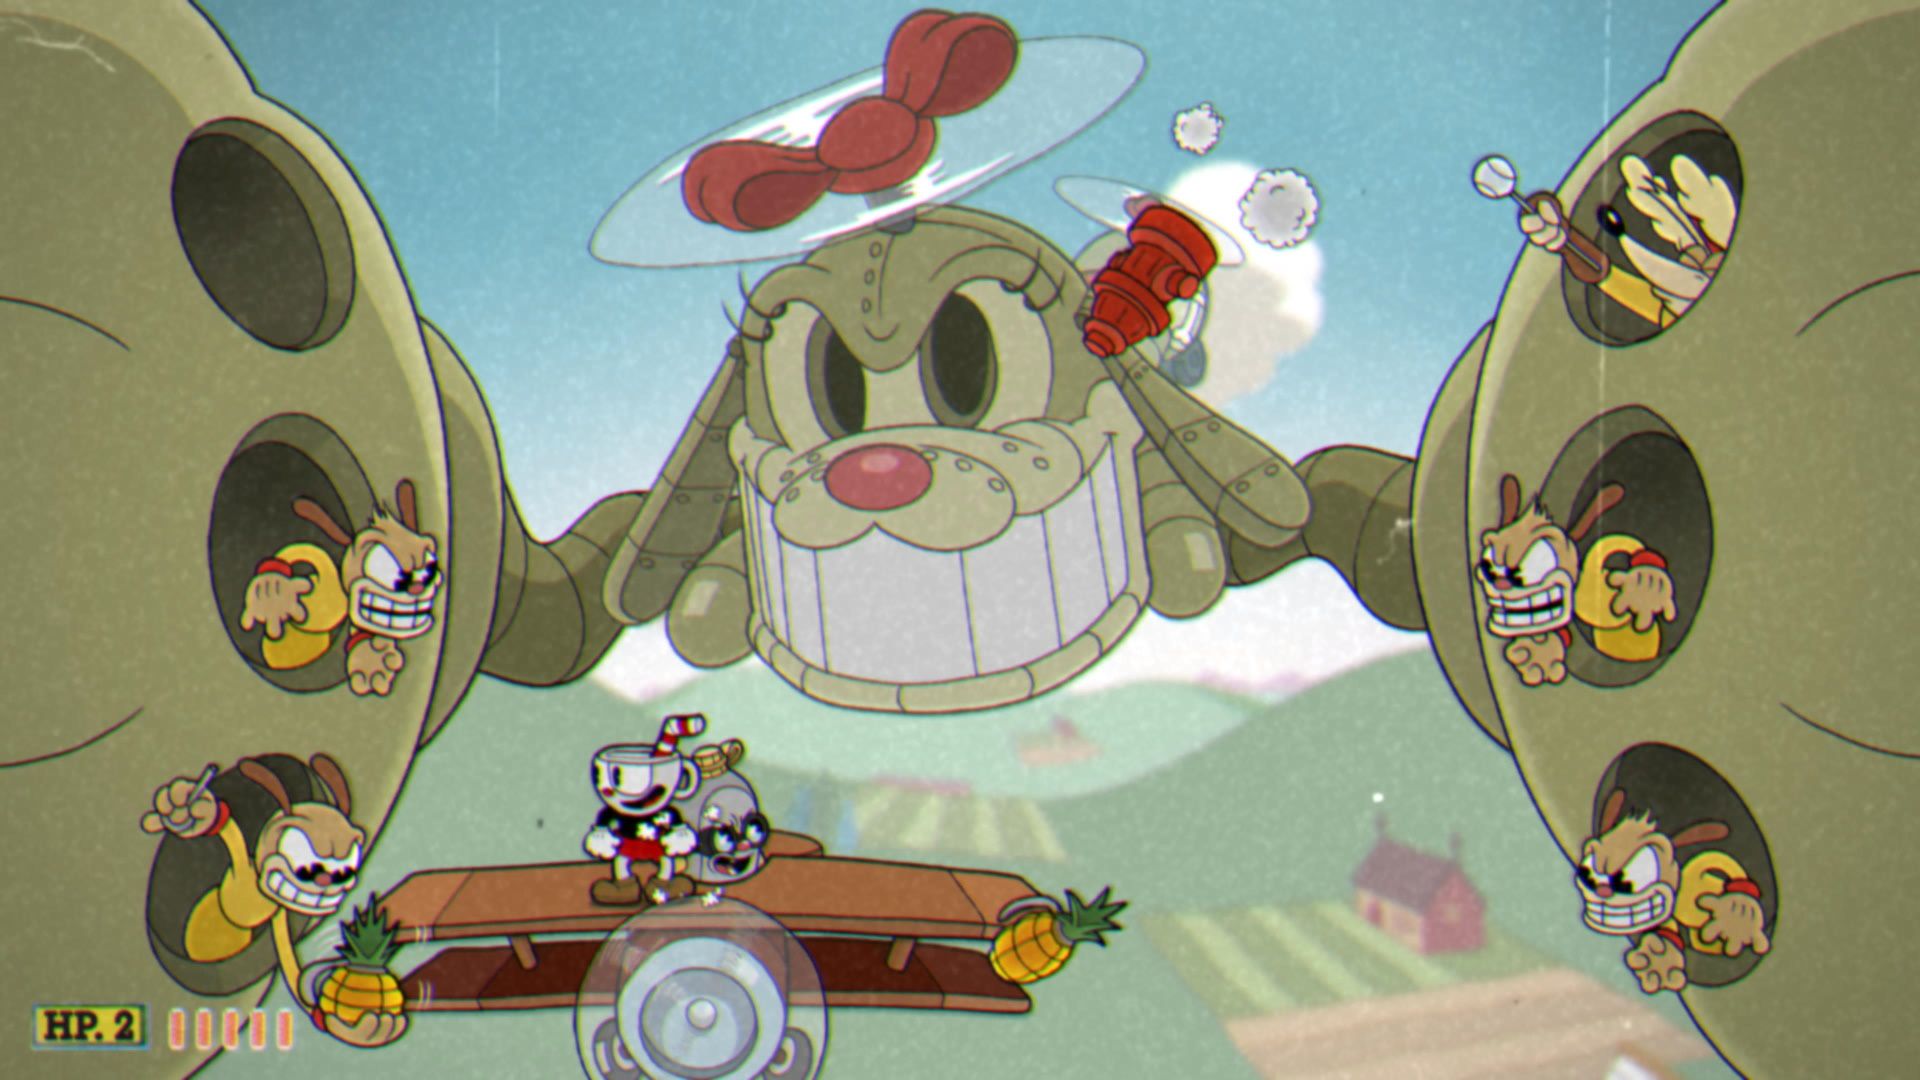 Cuphead The Delicious Course, The Howling Aces, Phase 3 Alternate, Incoming Fire Hydrant